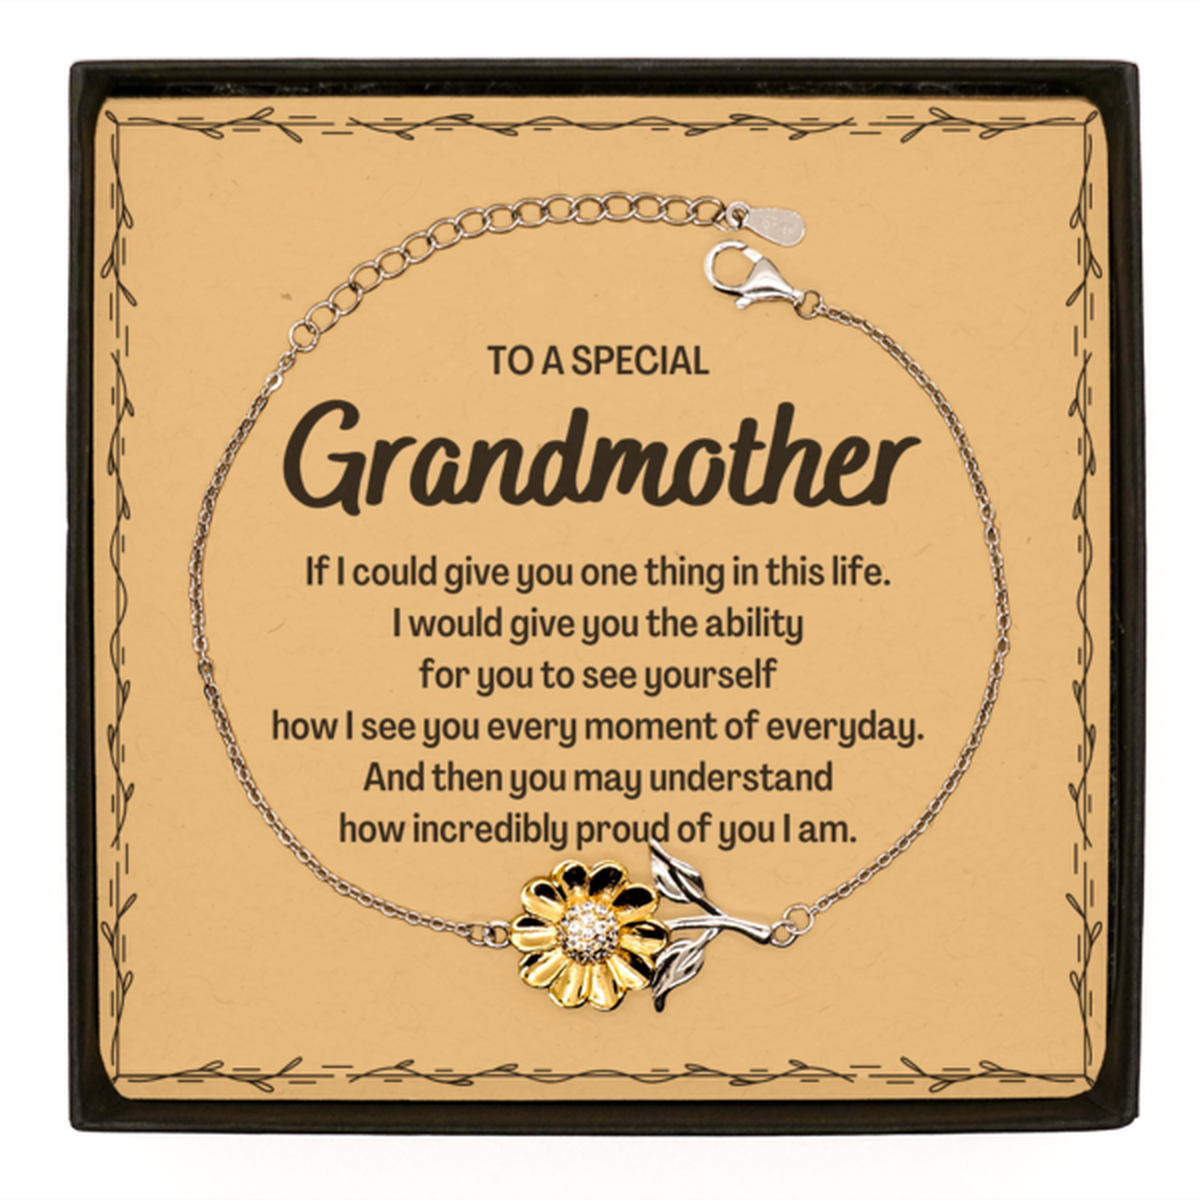 To My Grandmother Sunflower Bracelet, Gifts For Grandmother Message Card, Inspirational Gifts for Christmas Birthday, Epic Gifts for Grandmother To A Special Grandmother how incredibly proud of you I am